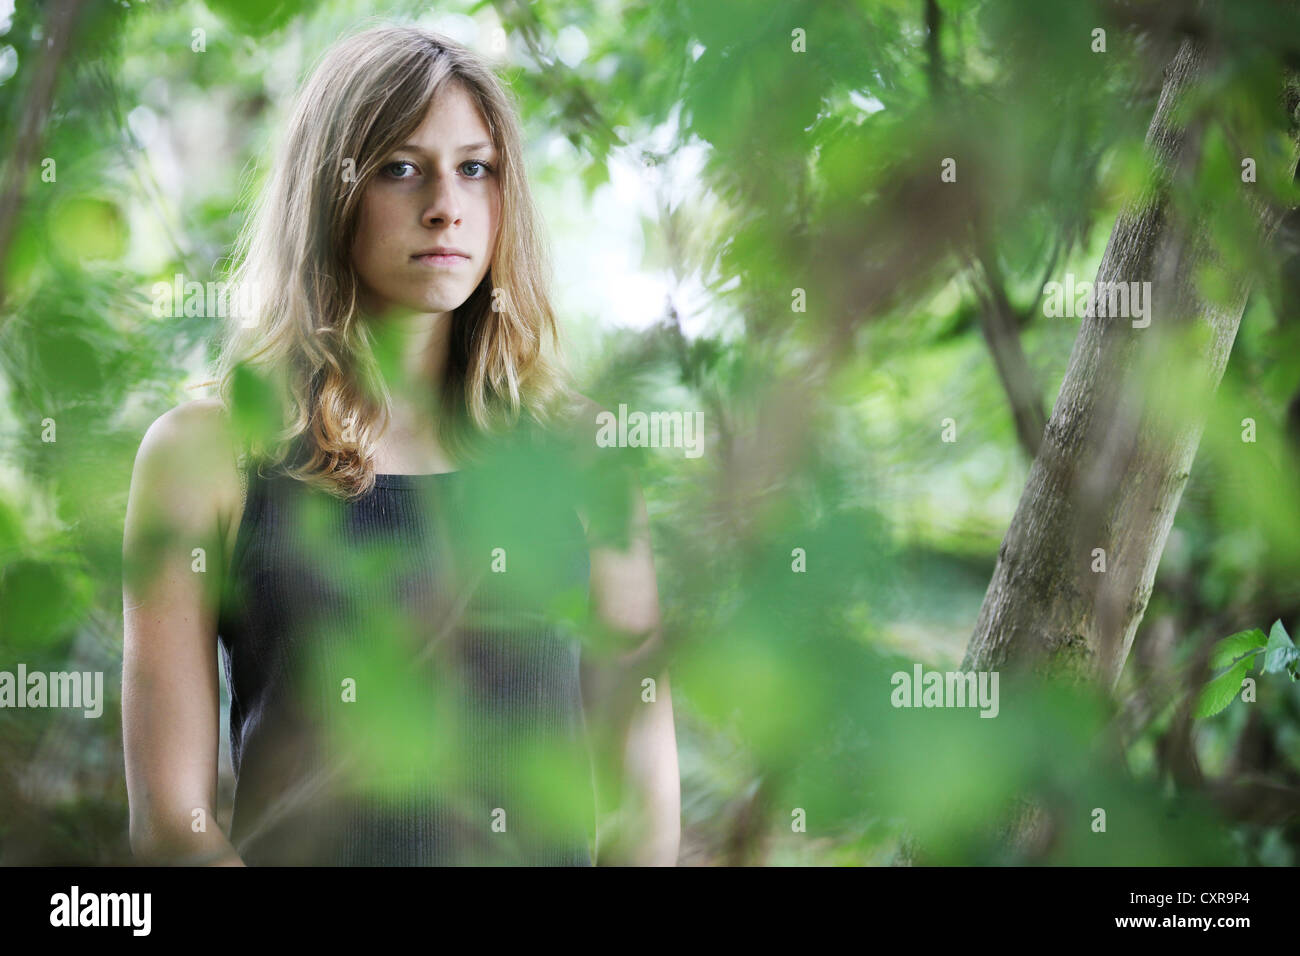 Young woman, portrait, in natural surroundings Stock Photo